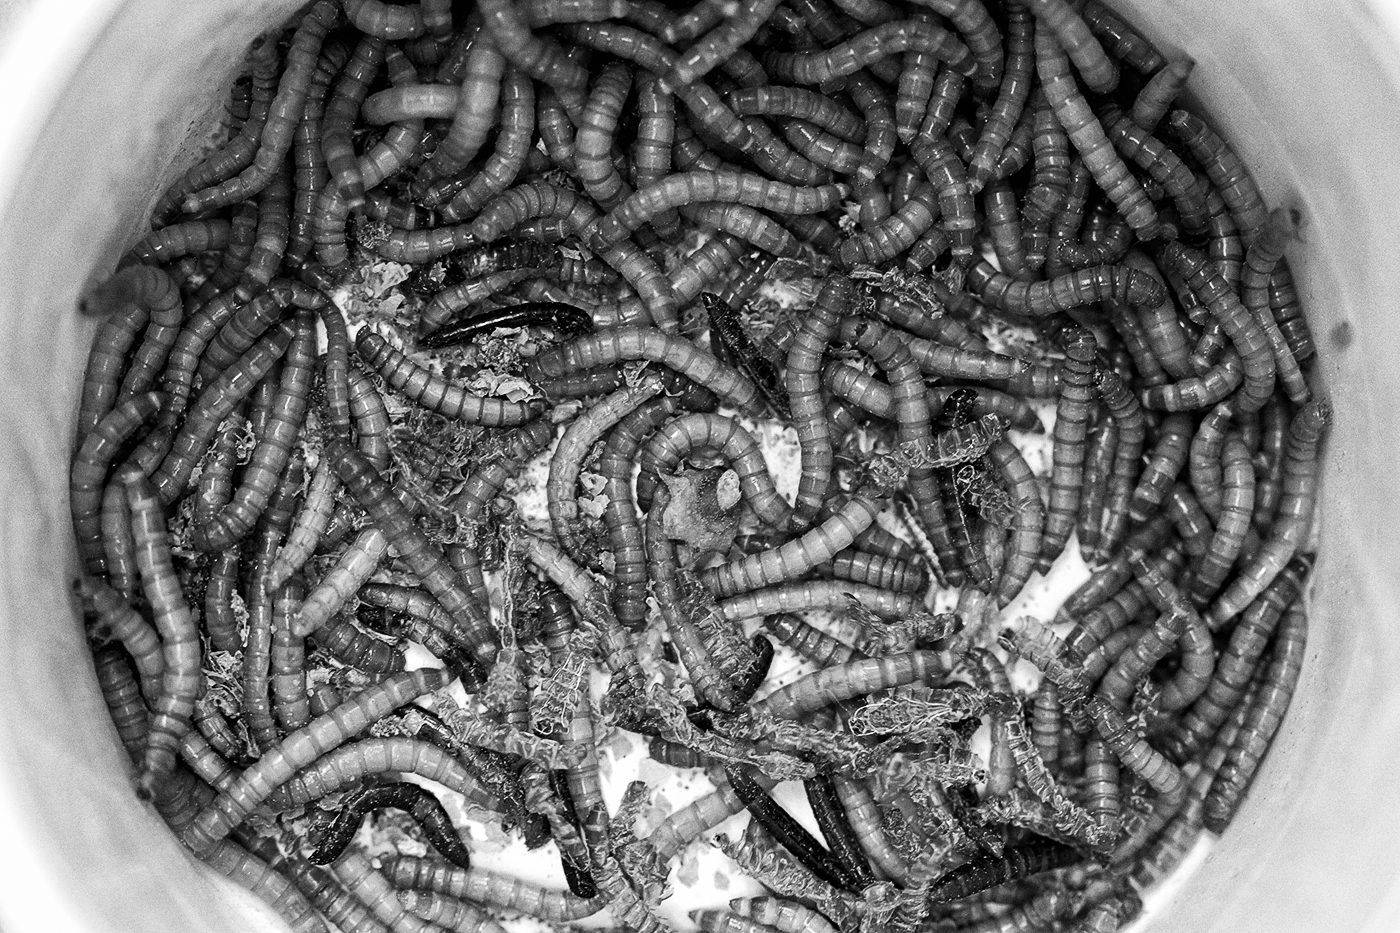 Worms in a bowl